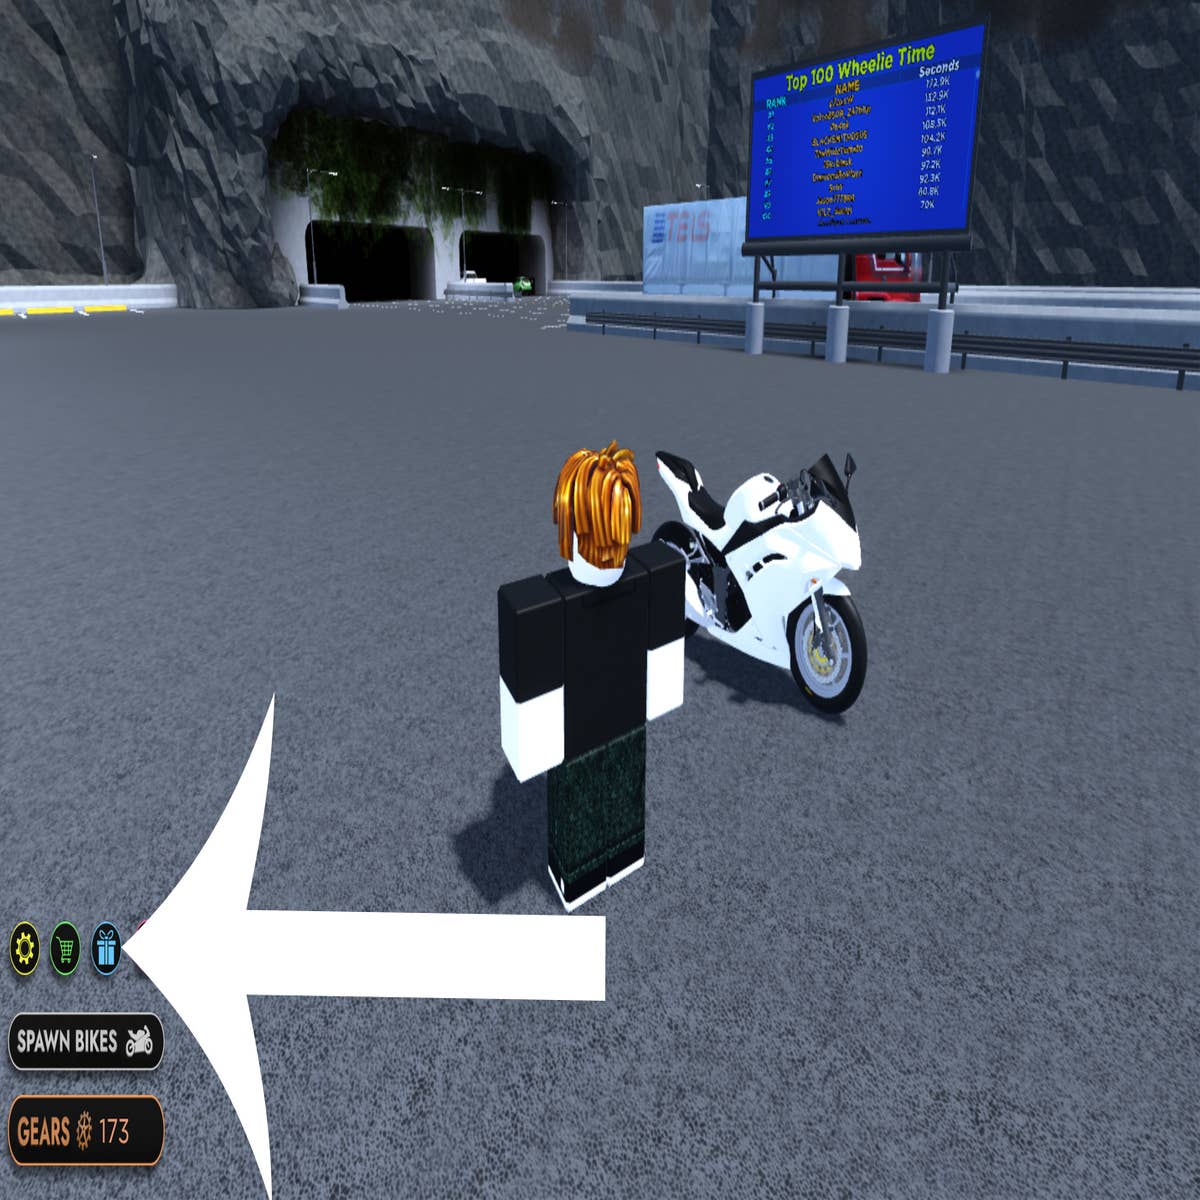 Exploring all the Gamepasses in Roblox Obby But You're On a Bike